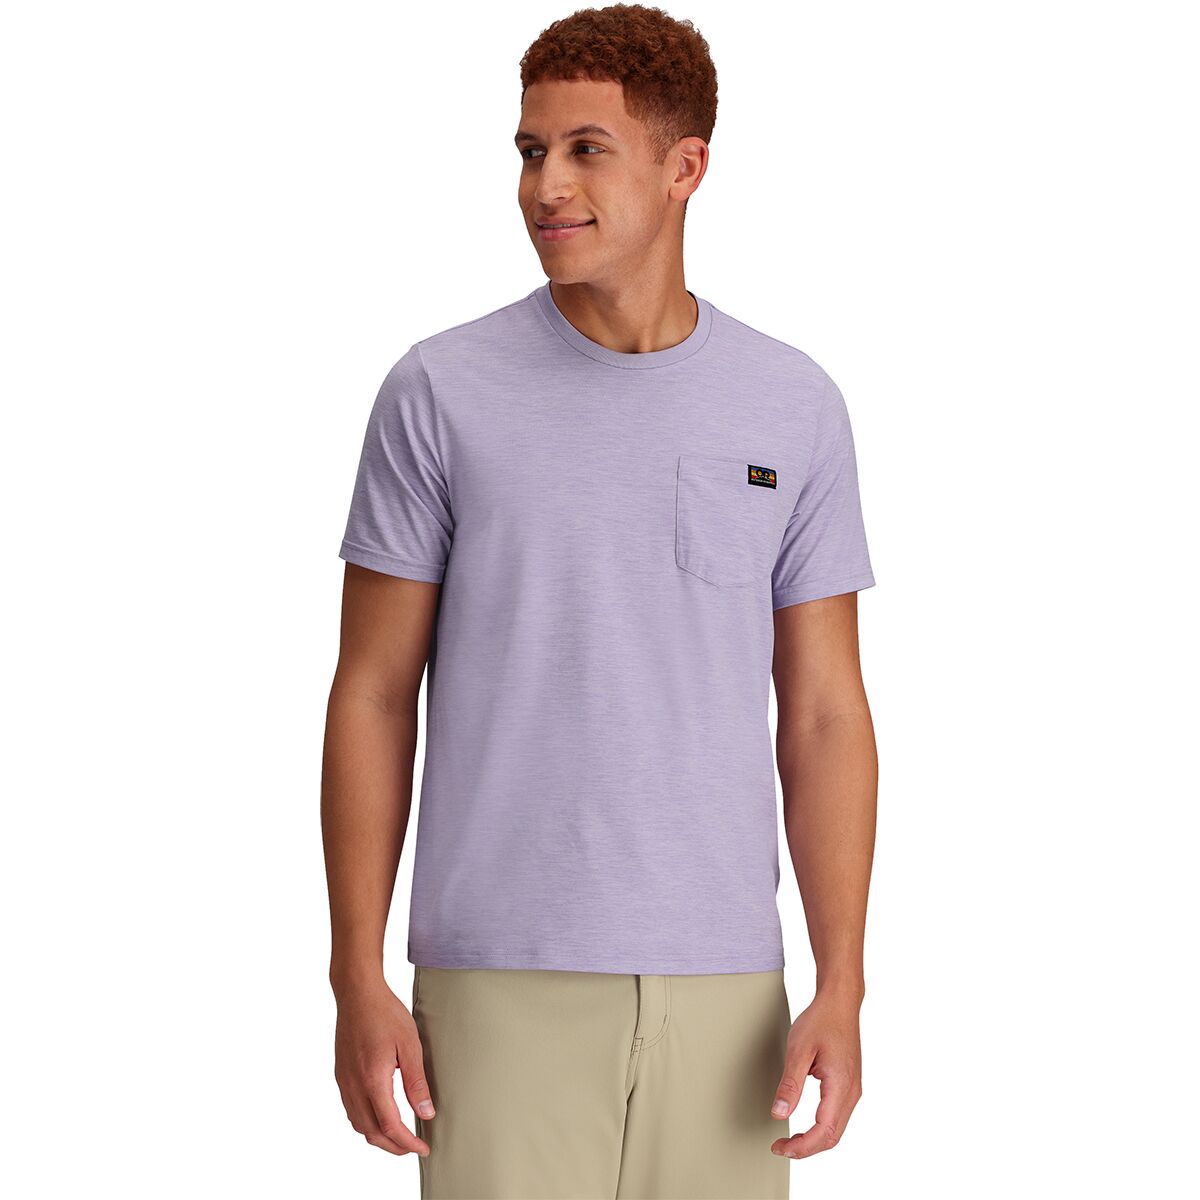 Essential Pocket T-Shirt - Men's by Outdoor Research | US-Parks.com